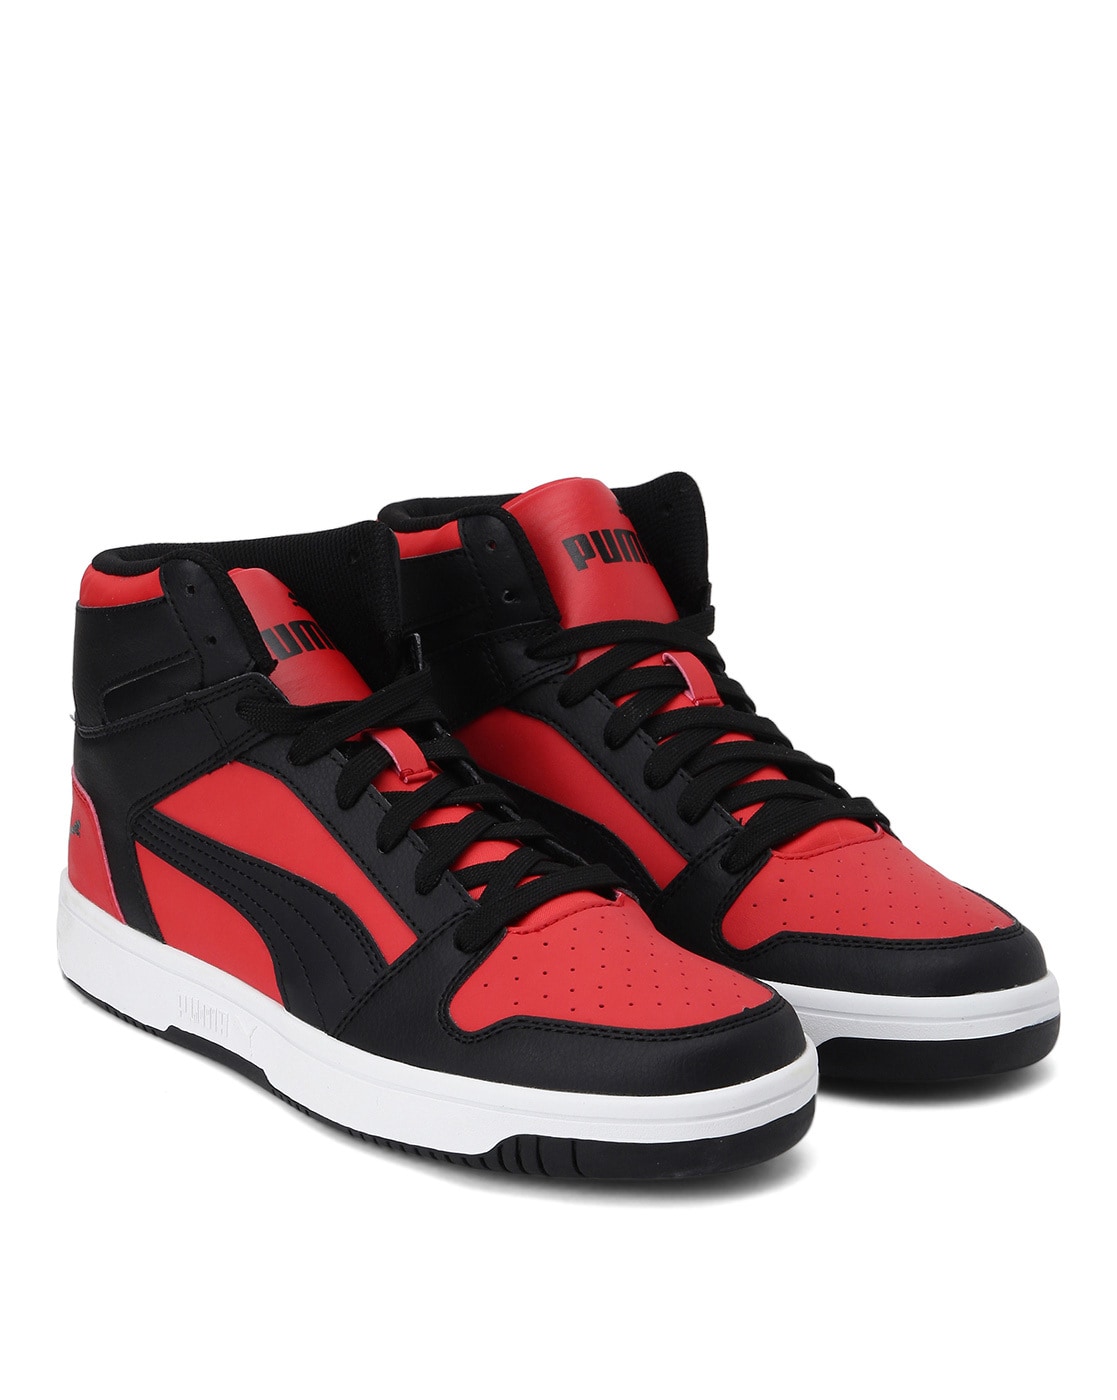 Buy Red Casual Shoes for Men by Puma 